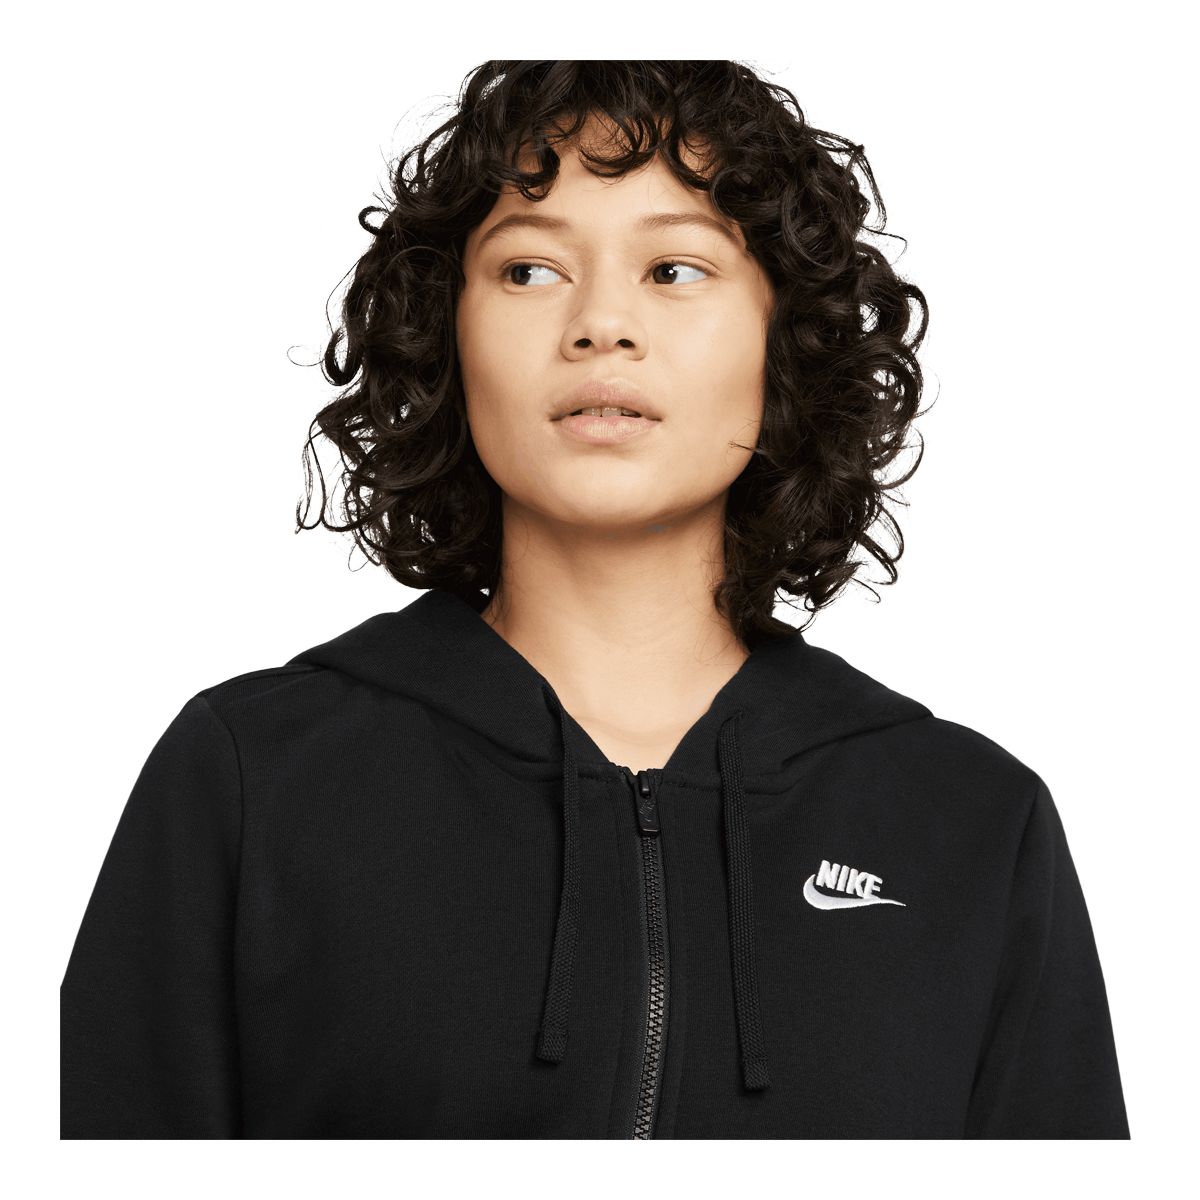 https://media-www.sportchek.ca/product/div-03-softgoods/dpt-70-athletic-clothing/sdpt-02-womens/334078521/nike-w-club-fleece-fz-hoodie-95fdbb2c-aa4a-4c6c-bcb2-f18c3dd7e0ec-jpgrendition.jpg?imdensity=1&imwidth=1244&impolicy=mZoom